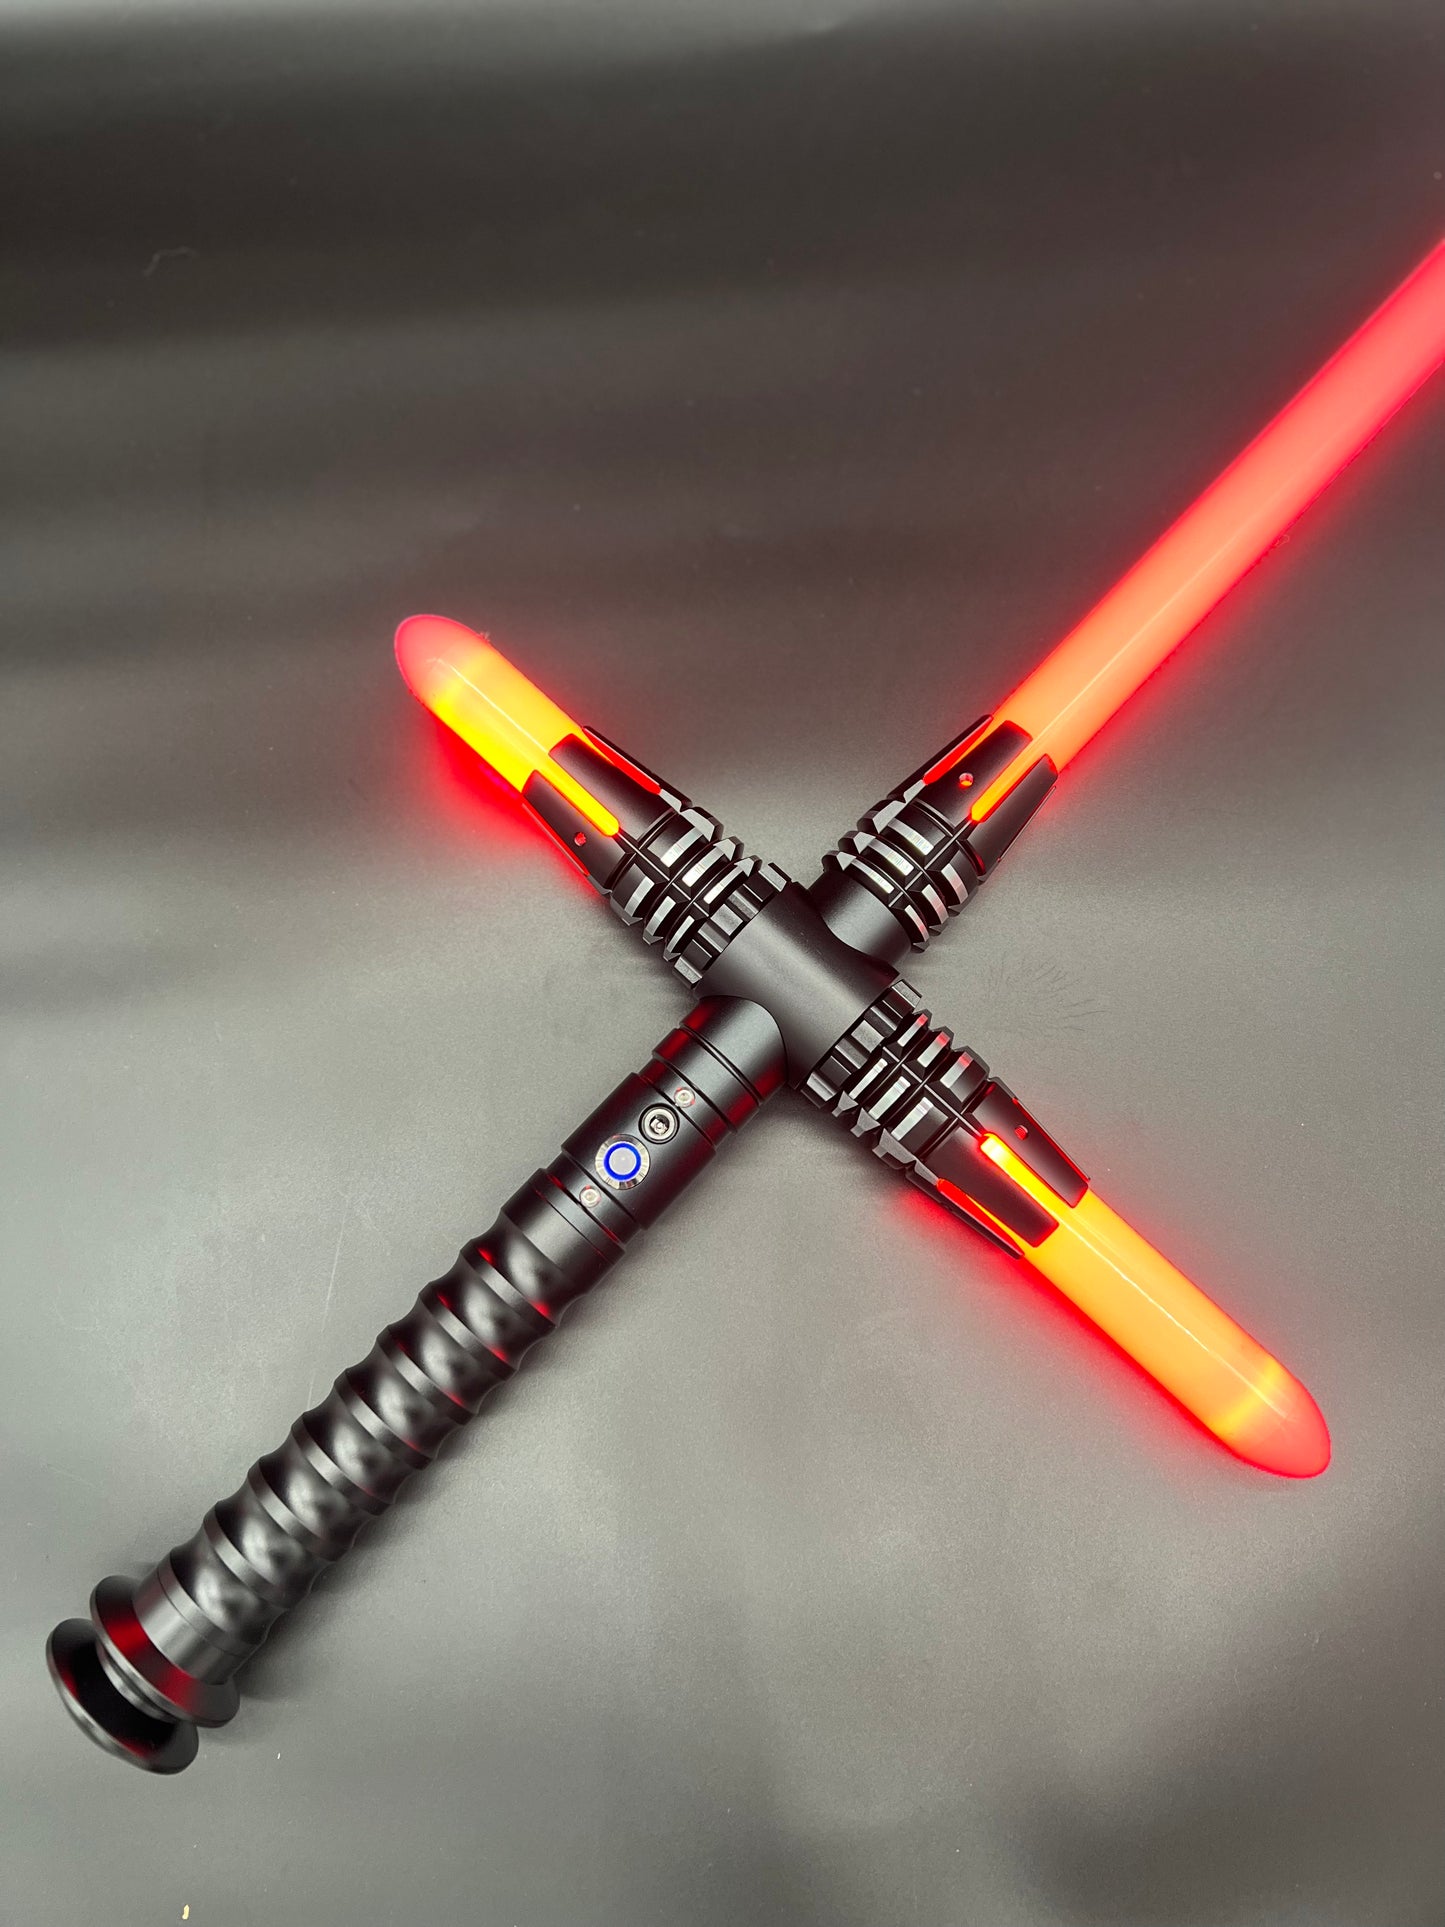 THE SITH CROSSBLADE LIGHTSABER